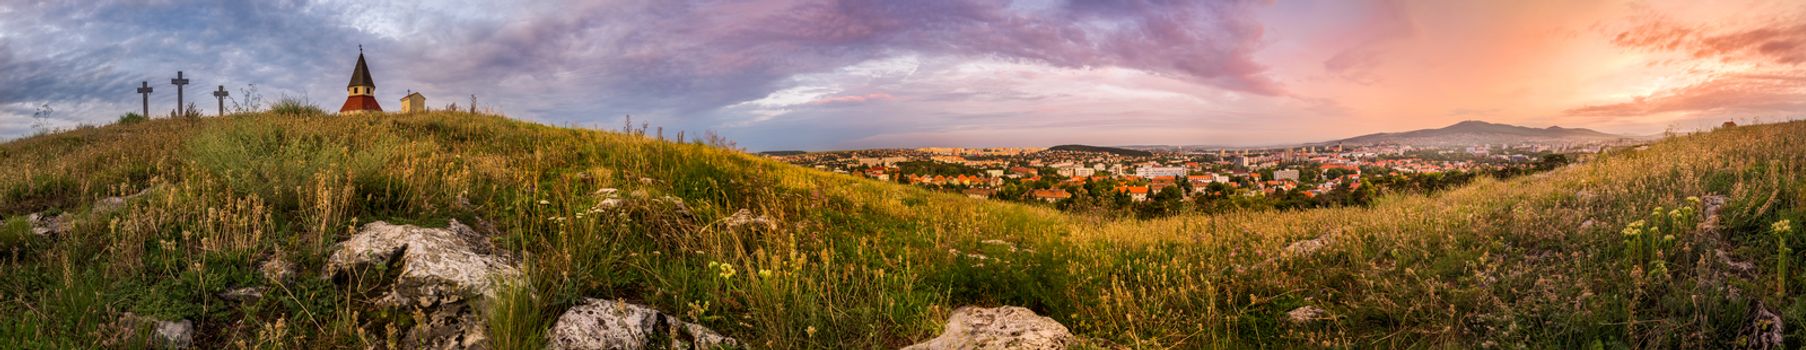 City and Village under a Hill at Sunset as Seen from Calvary, Nitra, Slovakia. Meadow with Flowers and Rocks in Foreground.